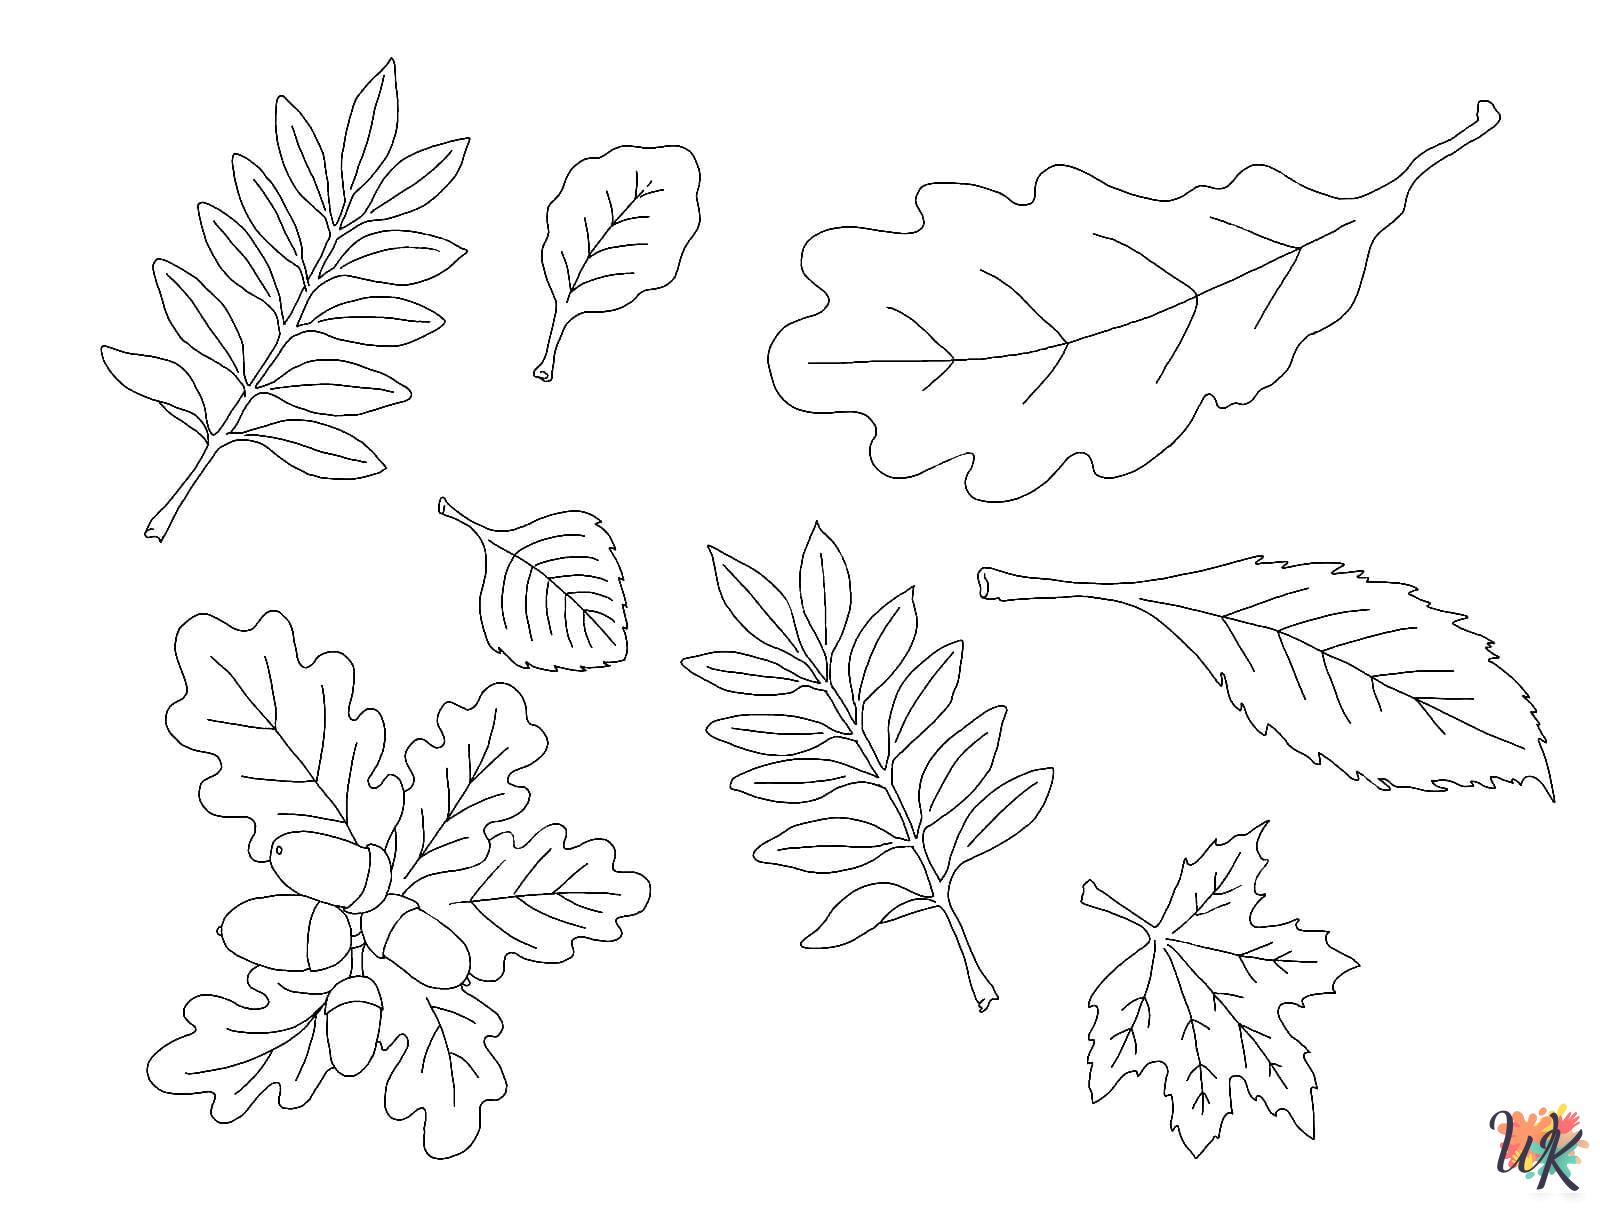 Fall Leaves coloring pages to print